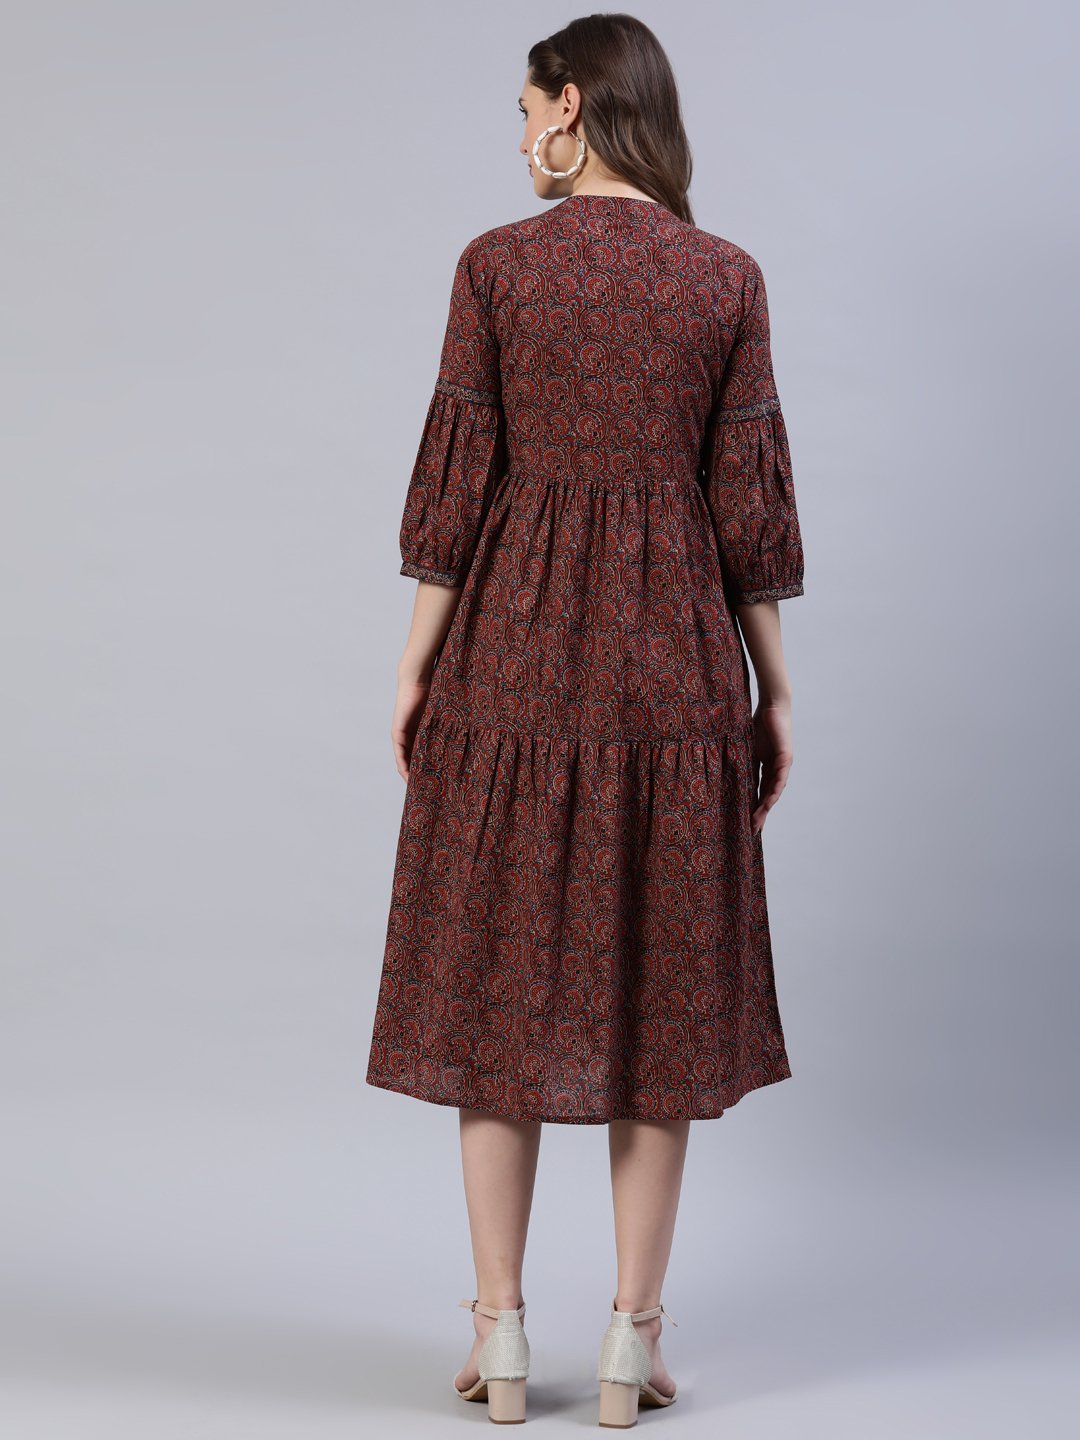 Women's Maroon Printed Dress With Three Quarter Sleeves - Nayo Clothing